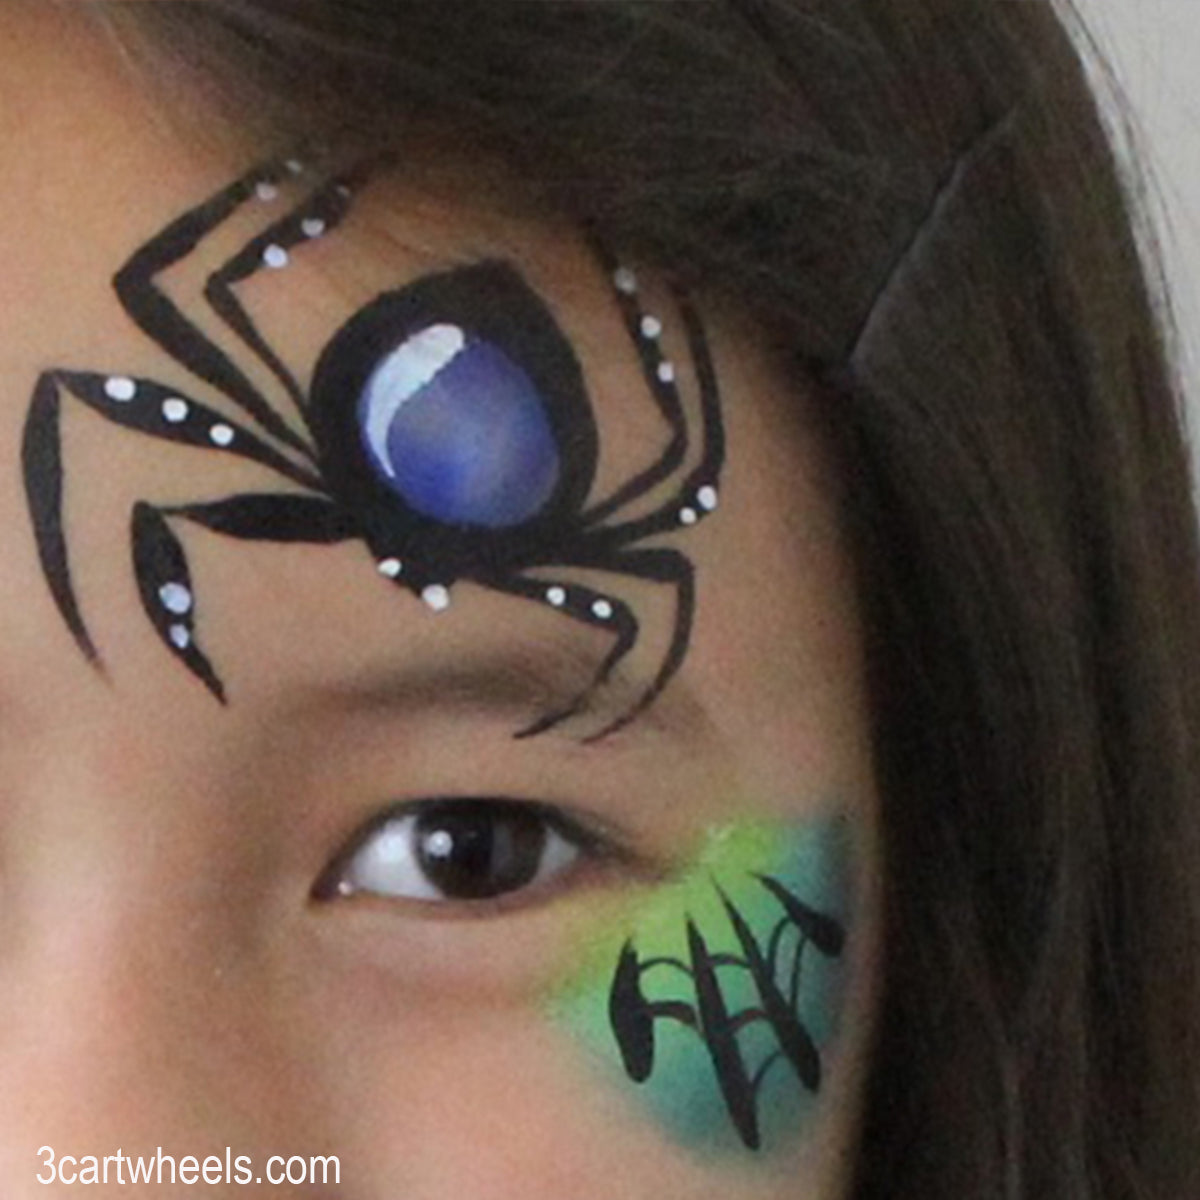 10 Steps to Face Painting Faster